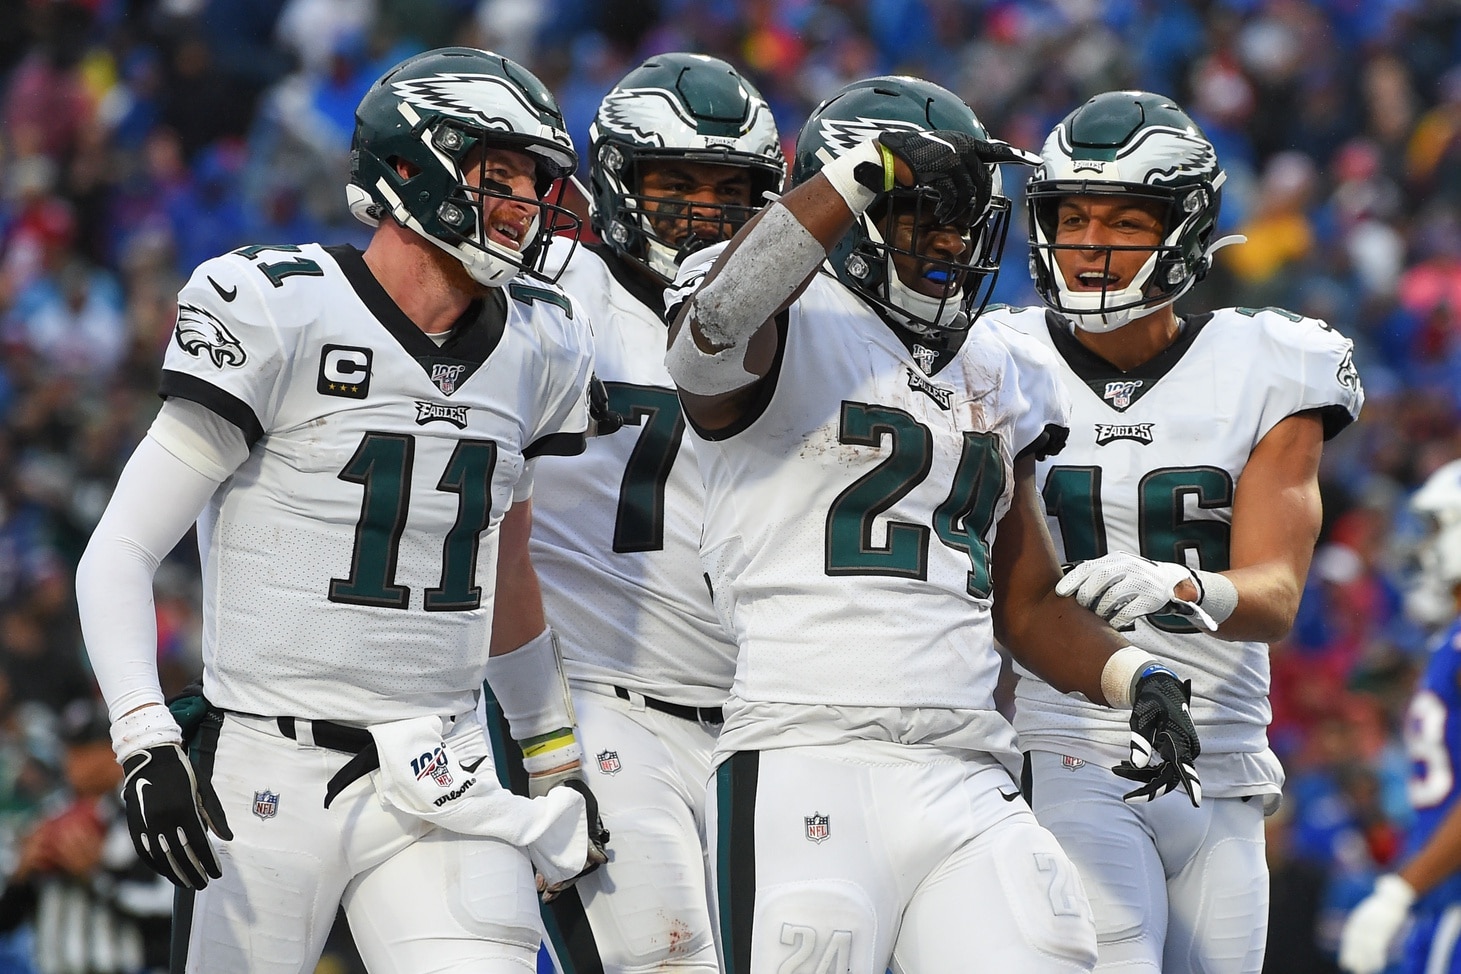 Eagles to Appear on Amazon’s “All or Nothing” Series at NFL’s Behest